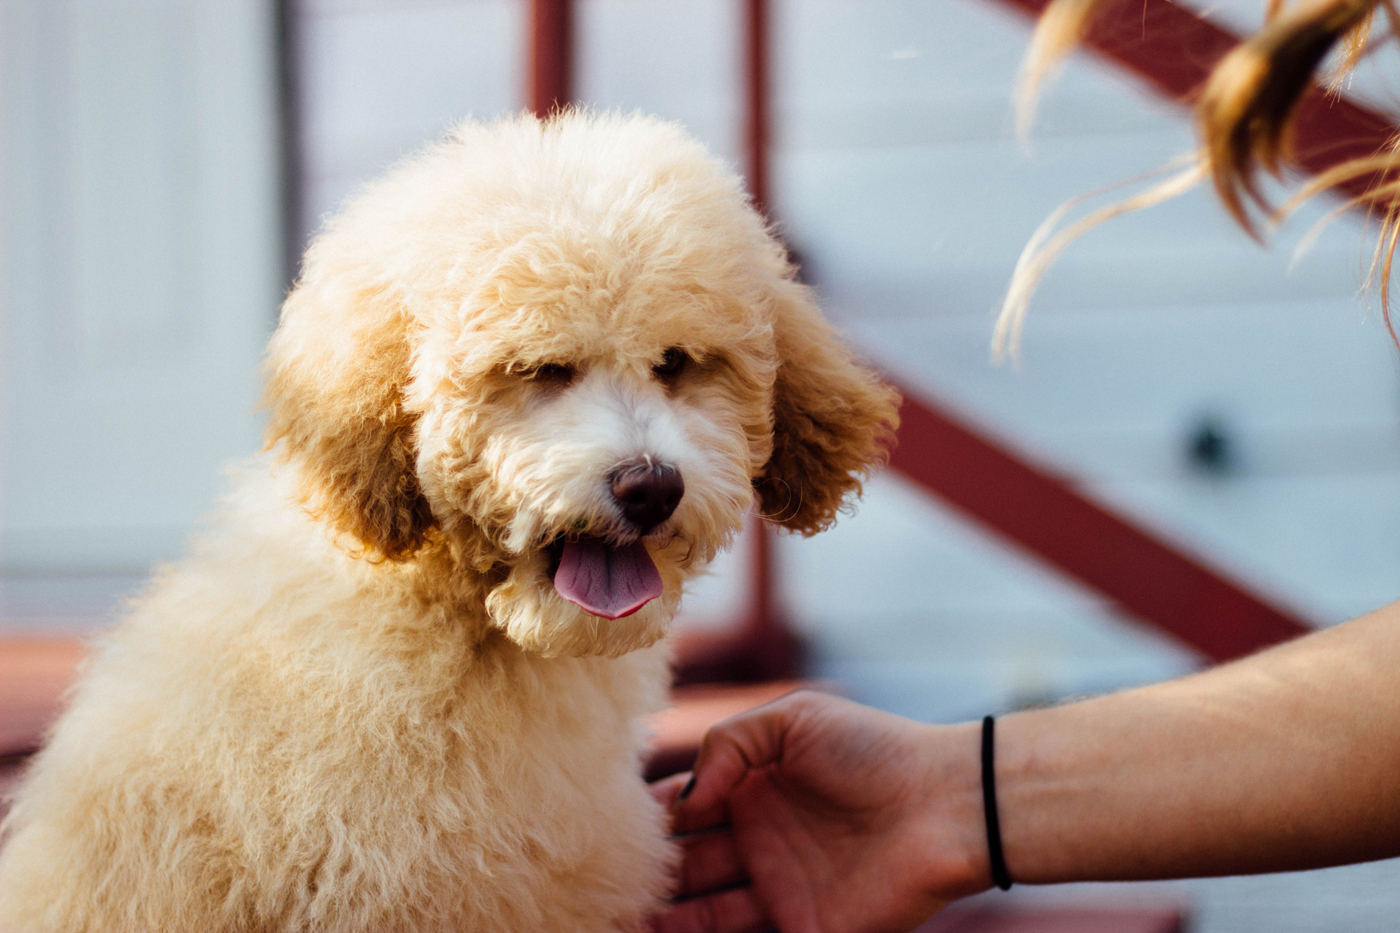 A well groomed poodle being stroked by owner